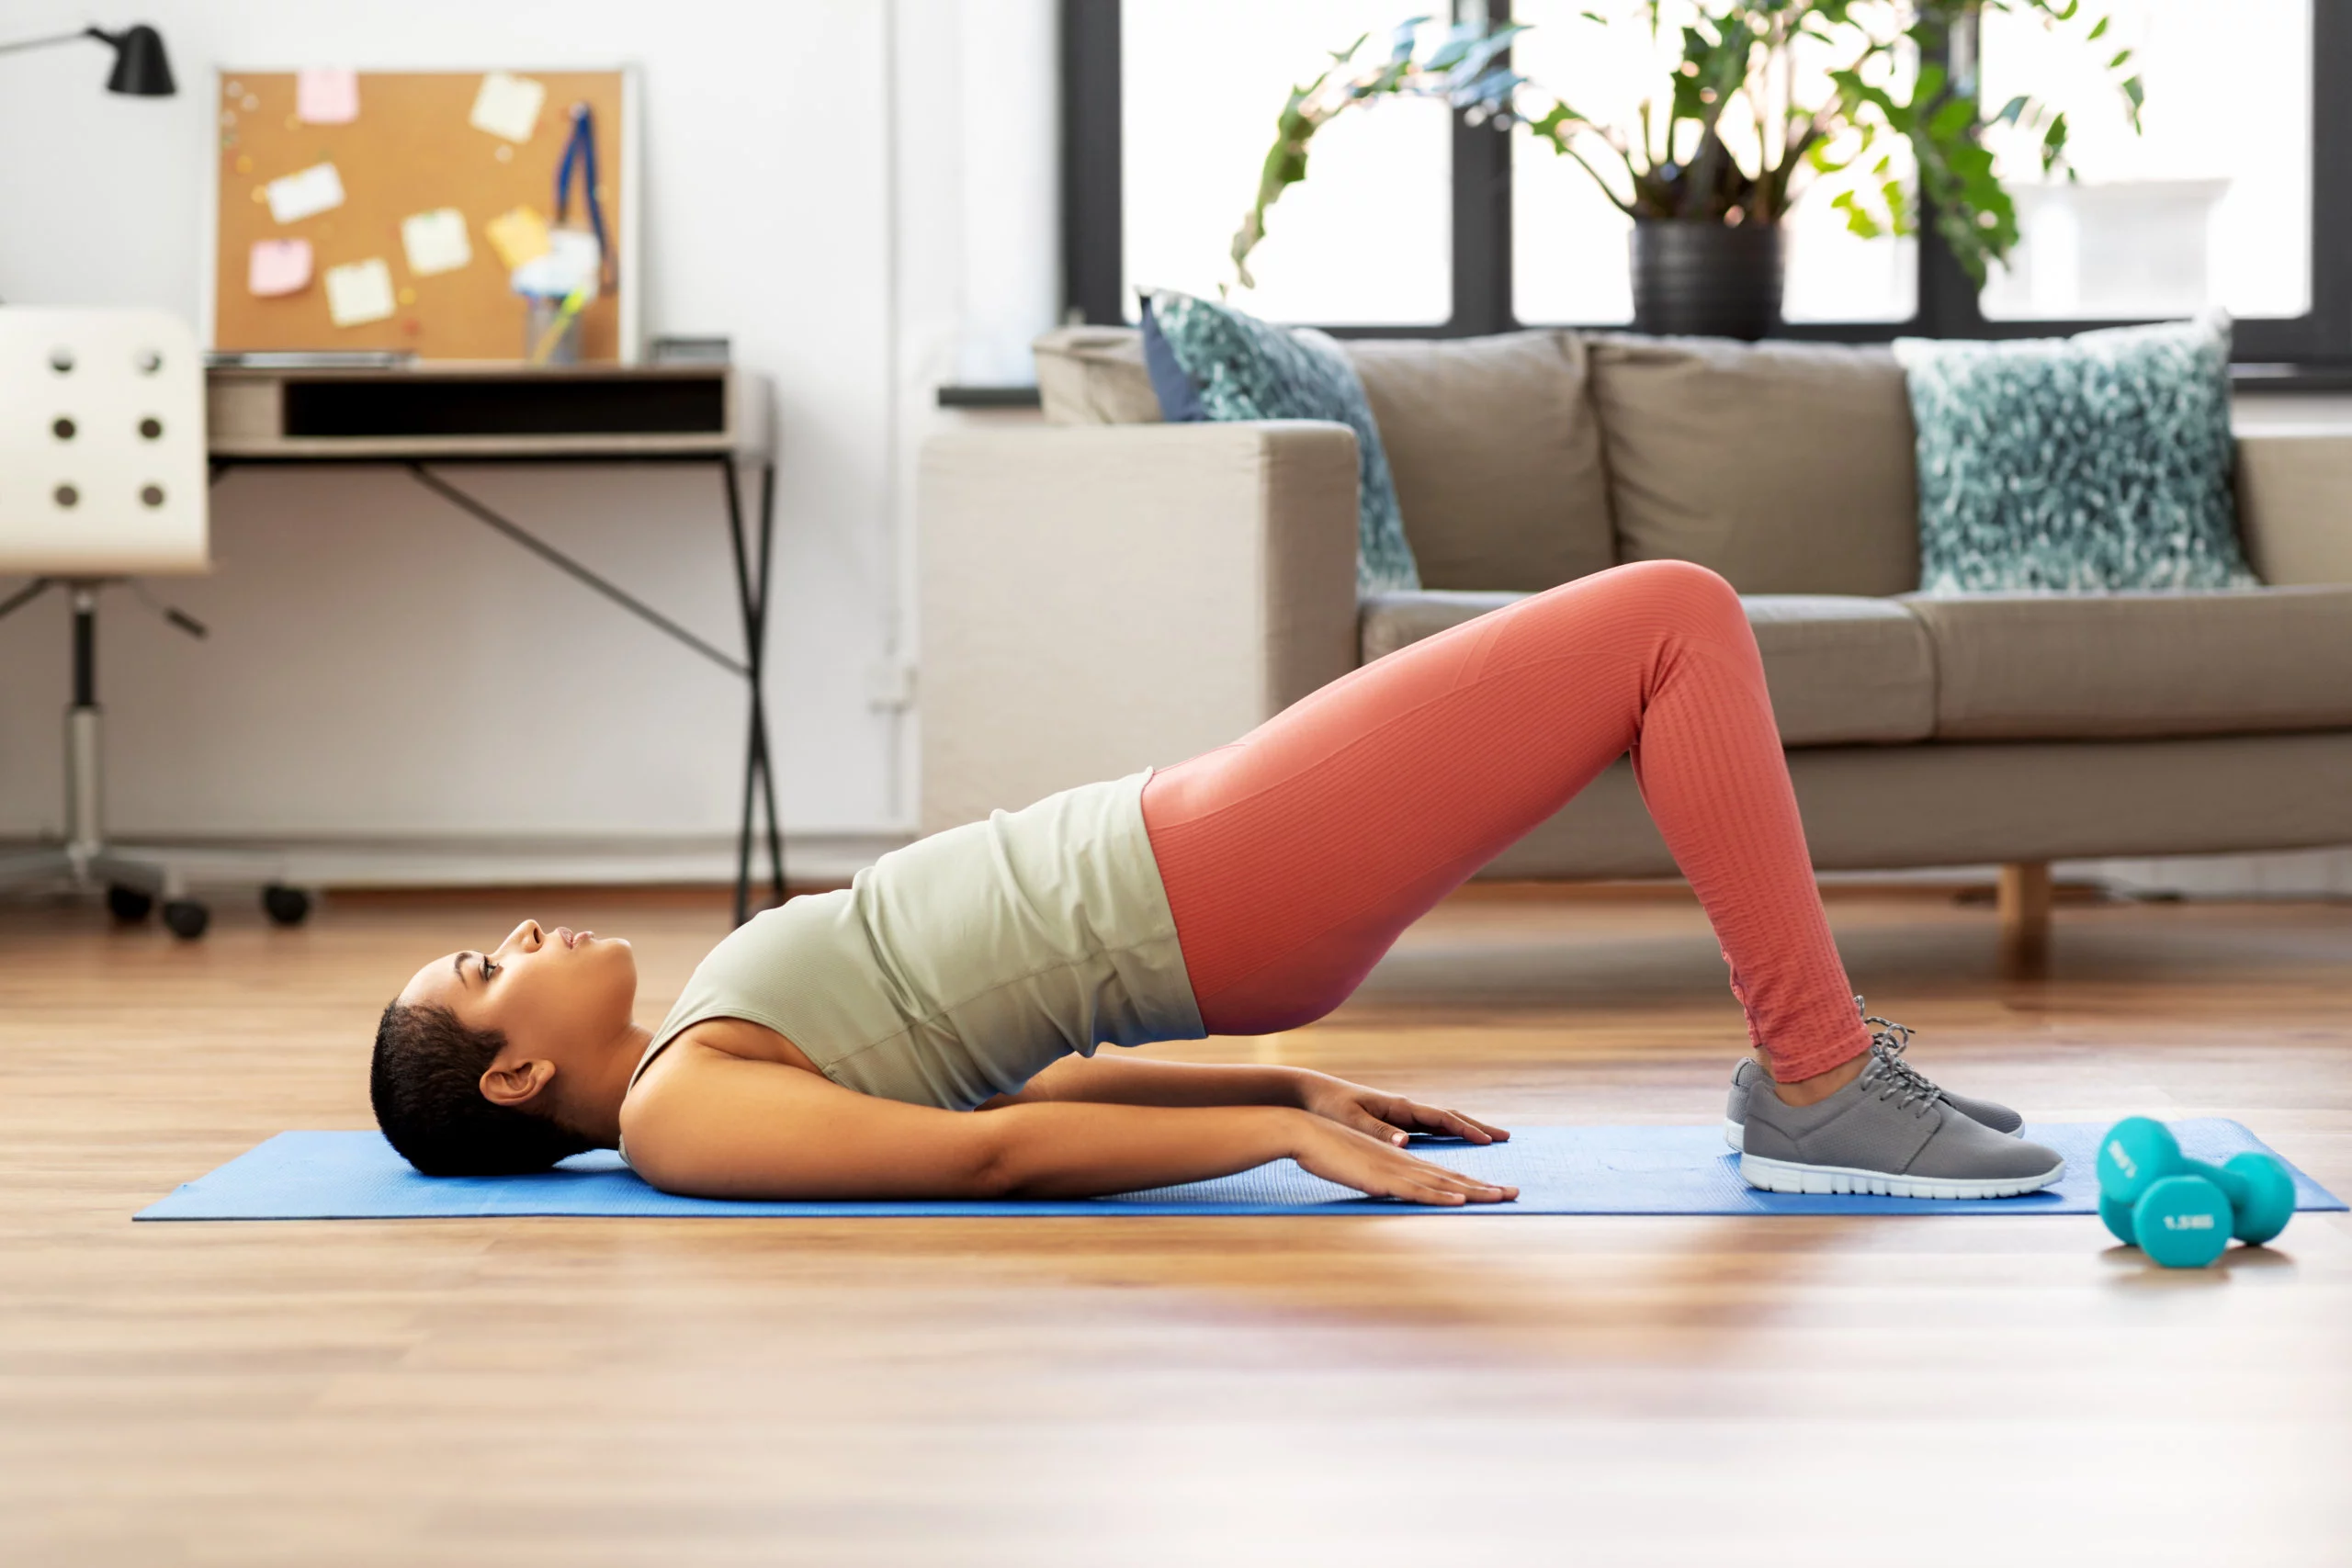 Thanks Order of the Pilates Exercises: Transitions on the Mat 4